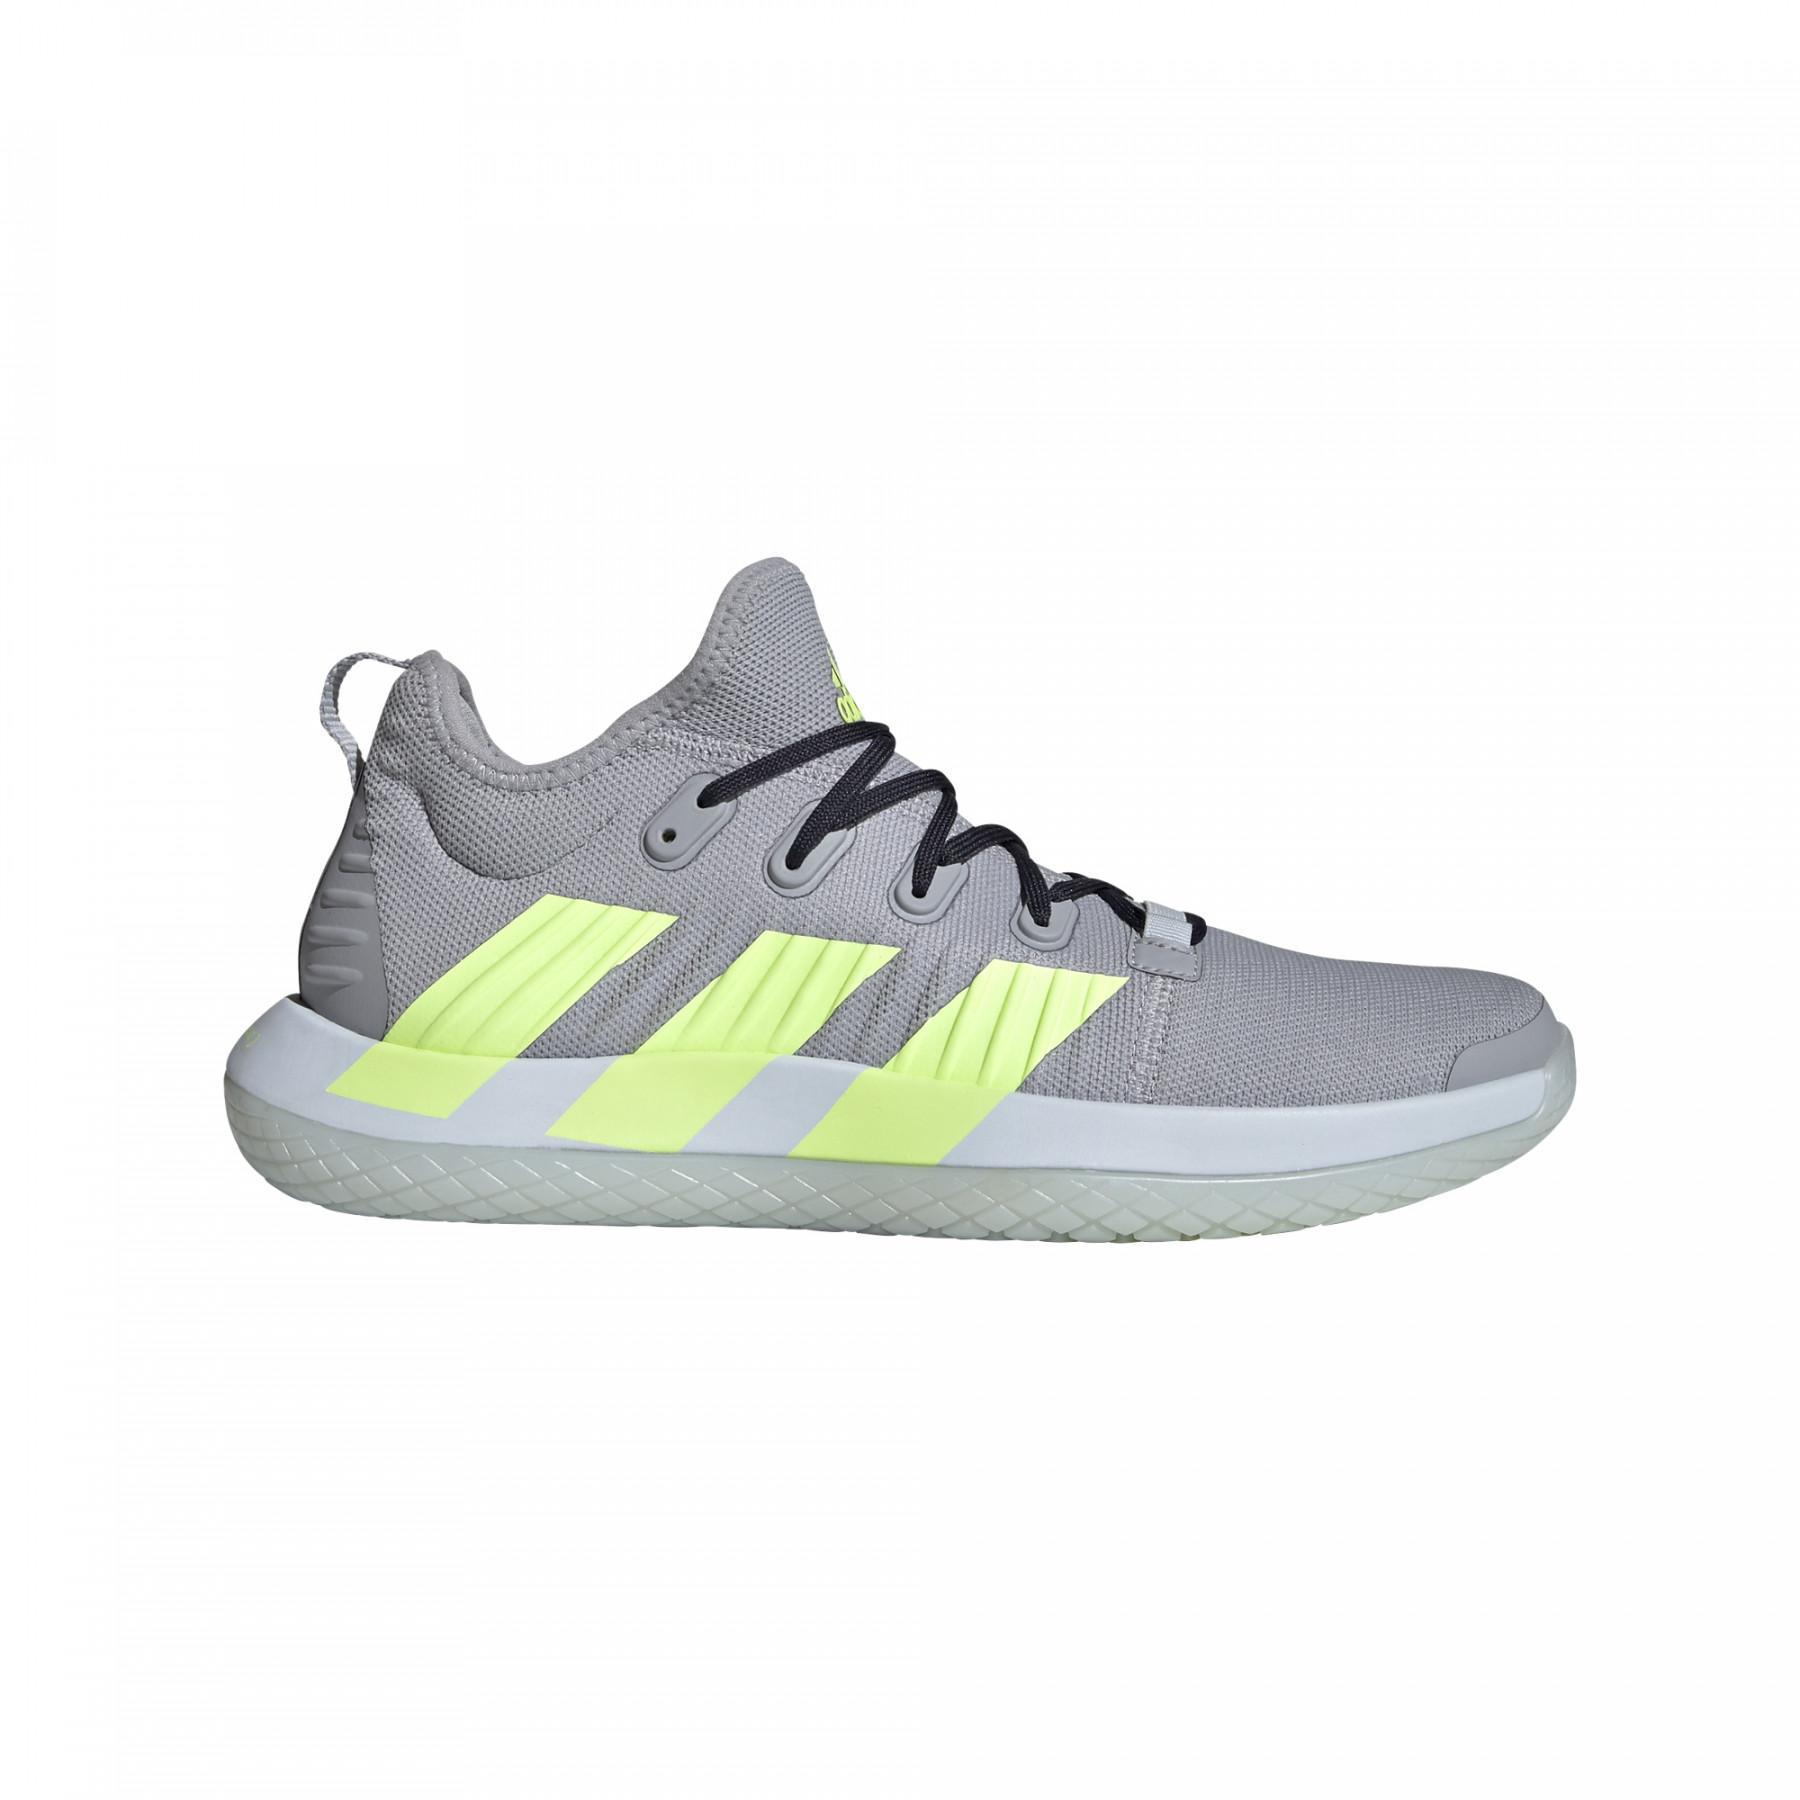 fetch license As far as people are concerned Shoes adidas Stabil Next Gen Pri